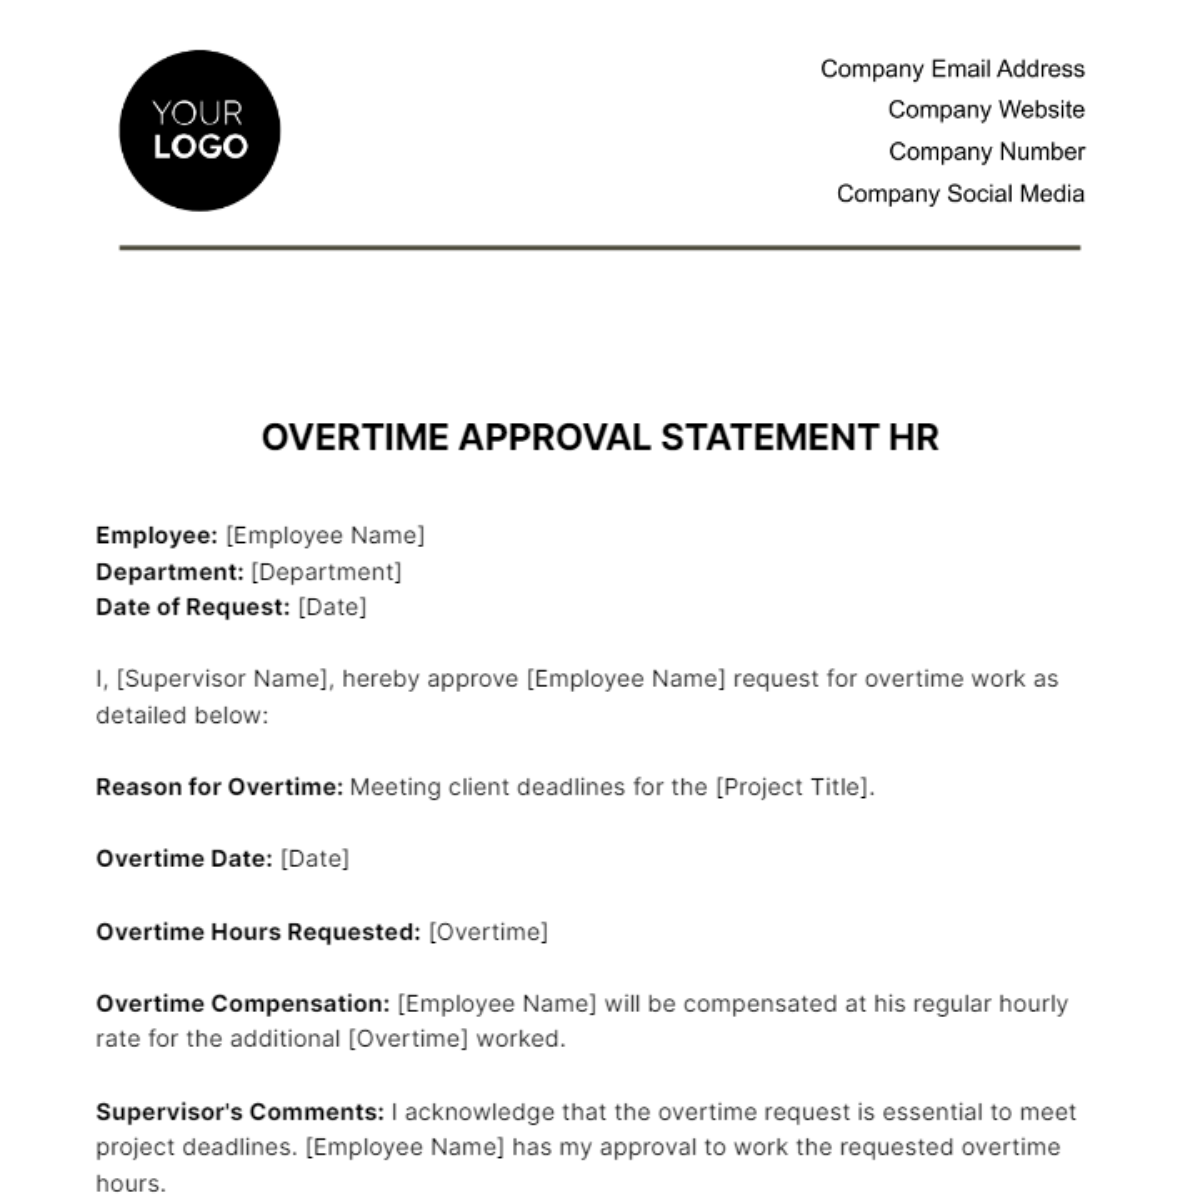 Overtime Approval Statement HR Template